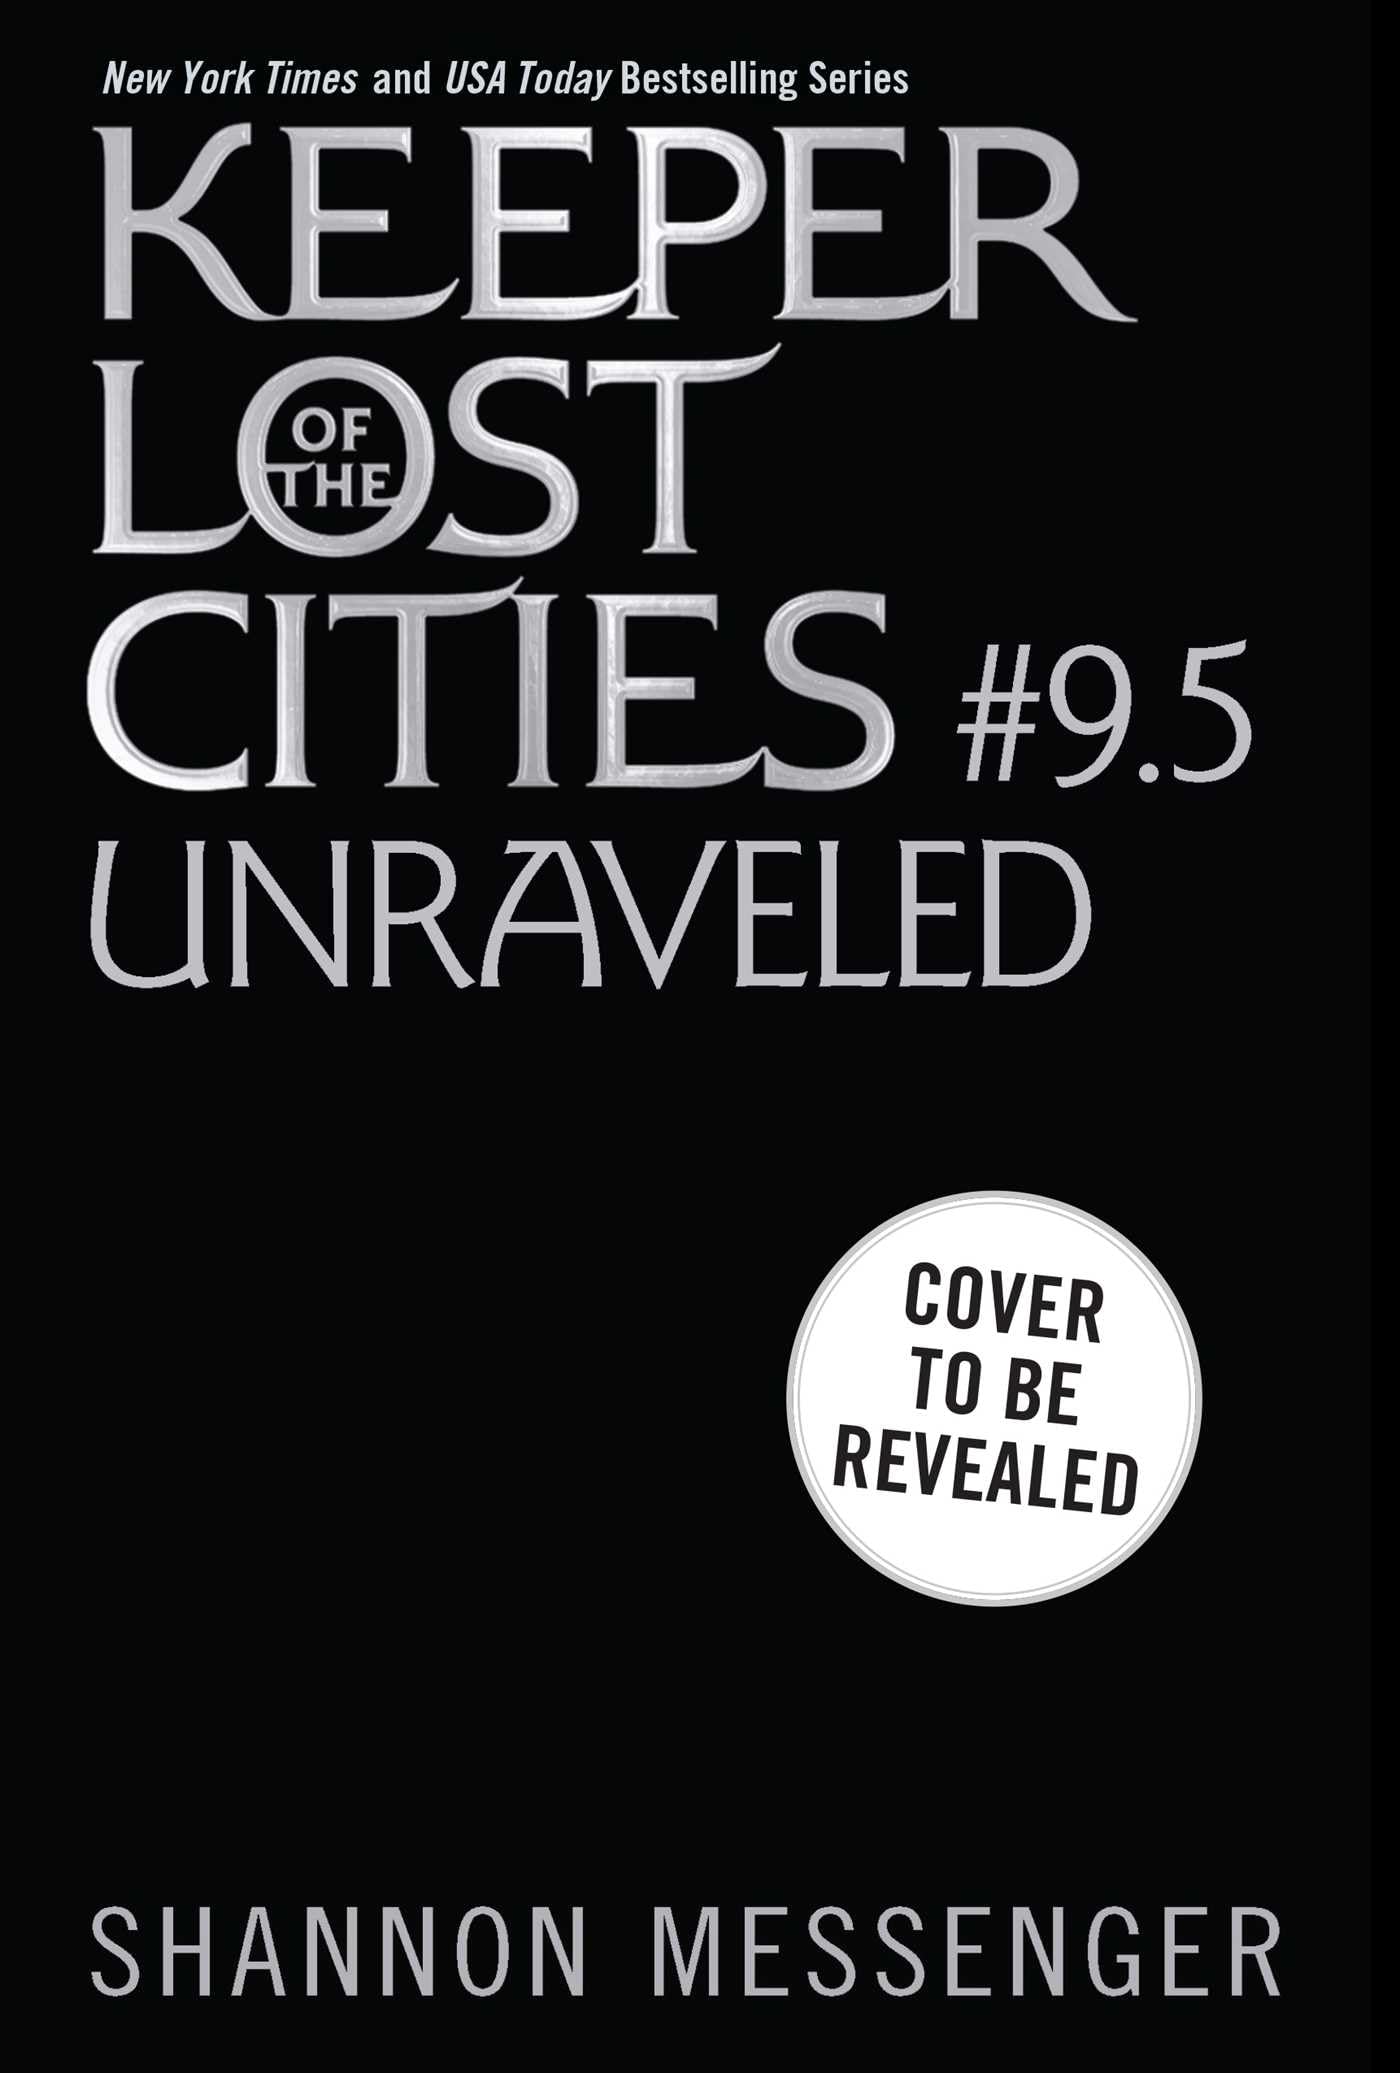 Unraveled Book 9.5 (Keeper of the Lost Cities)